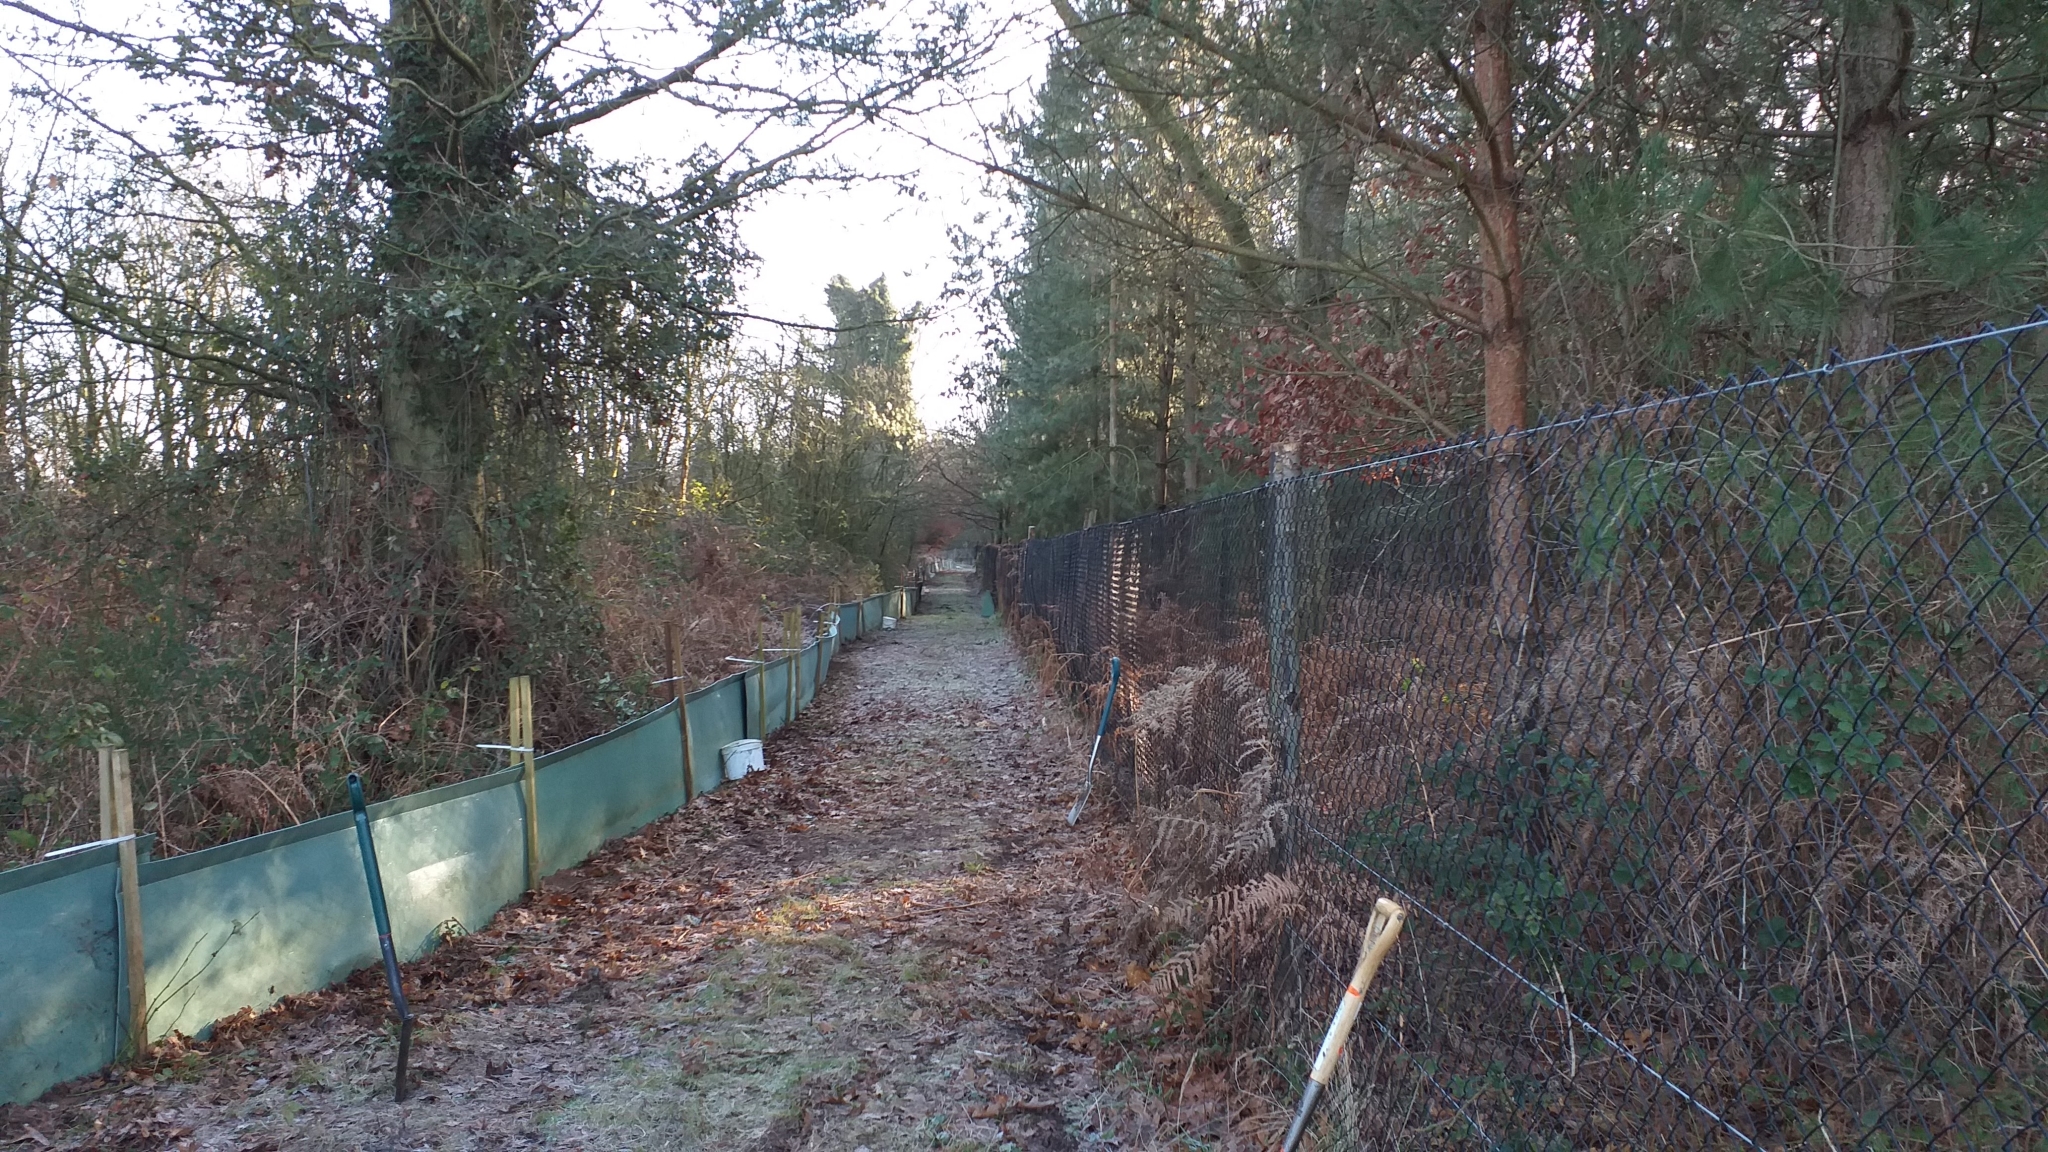 A photo from the FoTF Conservation Event - January 2020 - Erecting the Toad Fence at Cranwich : Erecting a section of the fence